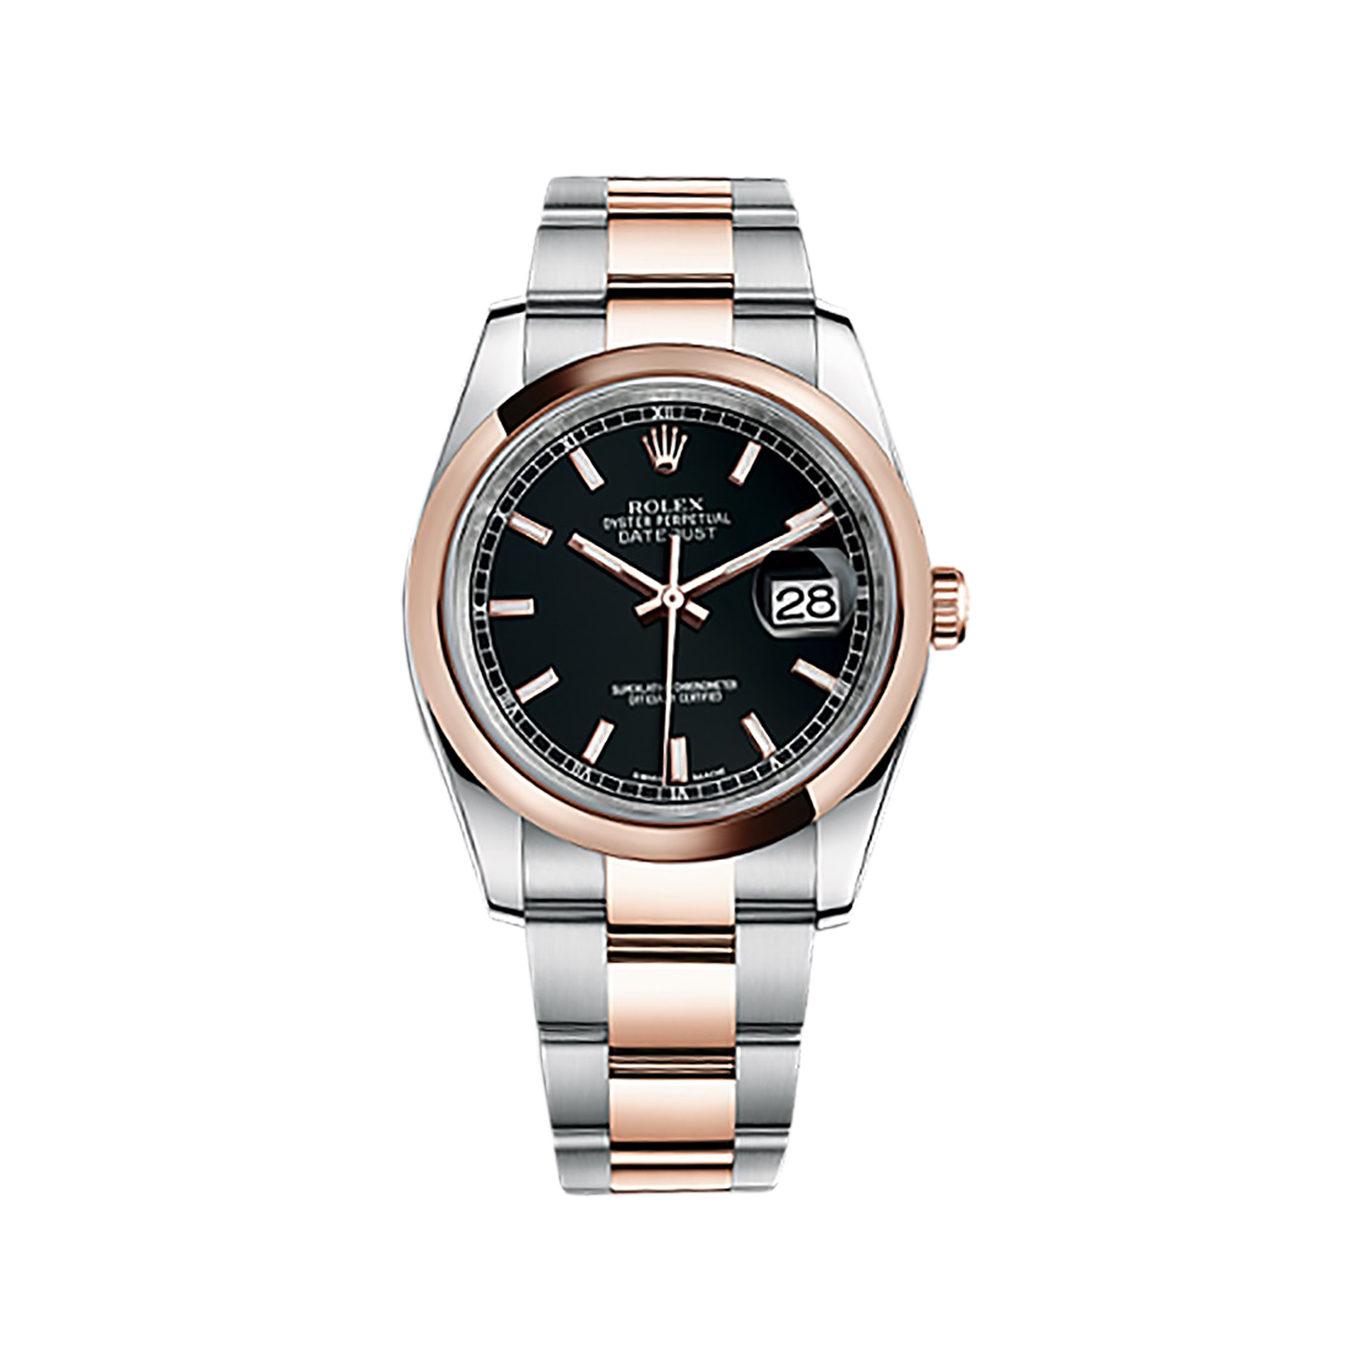 Datejust 36 116201 Rose Gold & Stainless Steel Watch (Black)